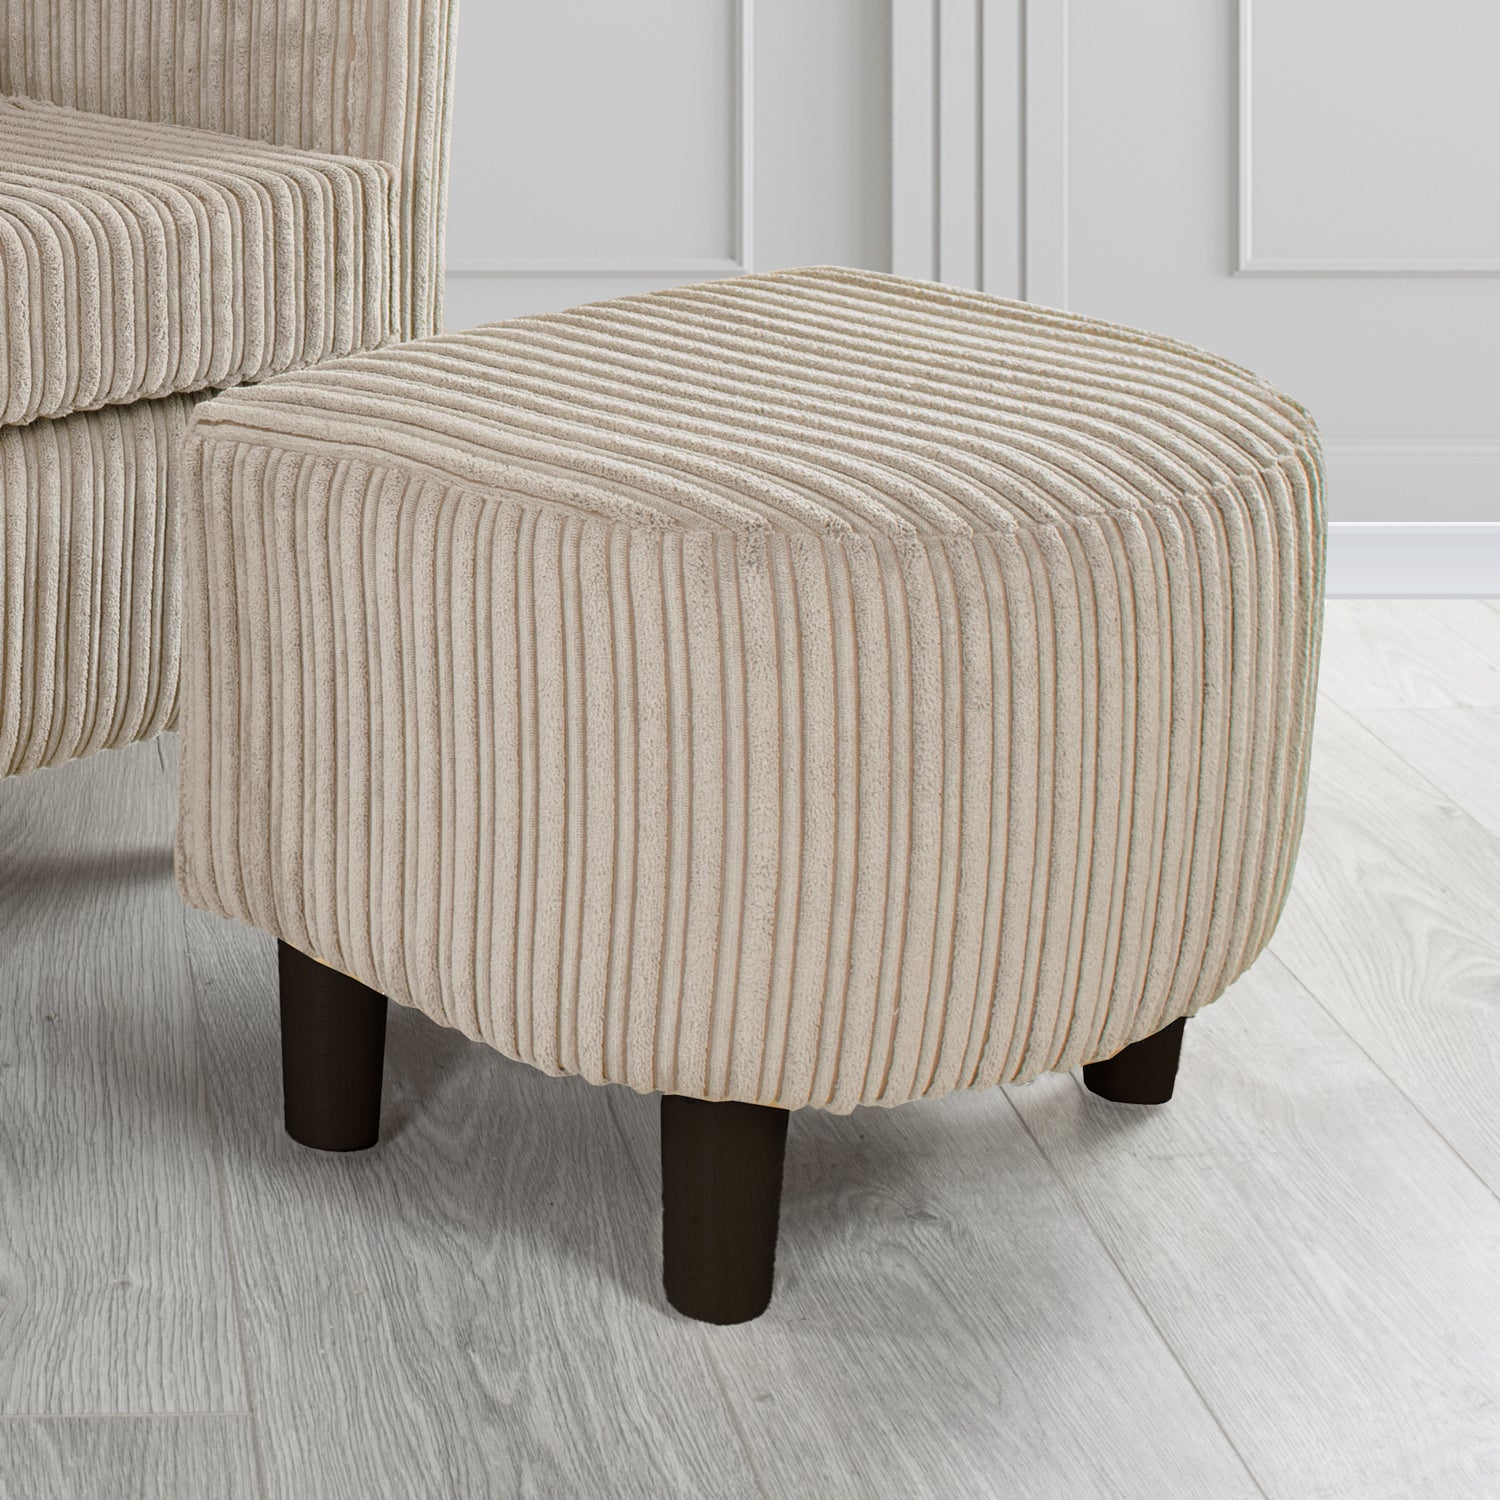 Tuscany Conway Mink Plain Textured Fabric Footstool (6587016183850)